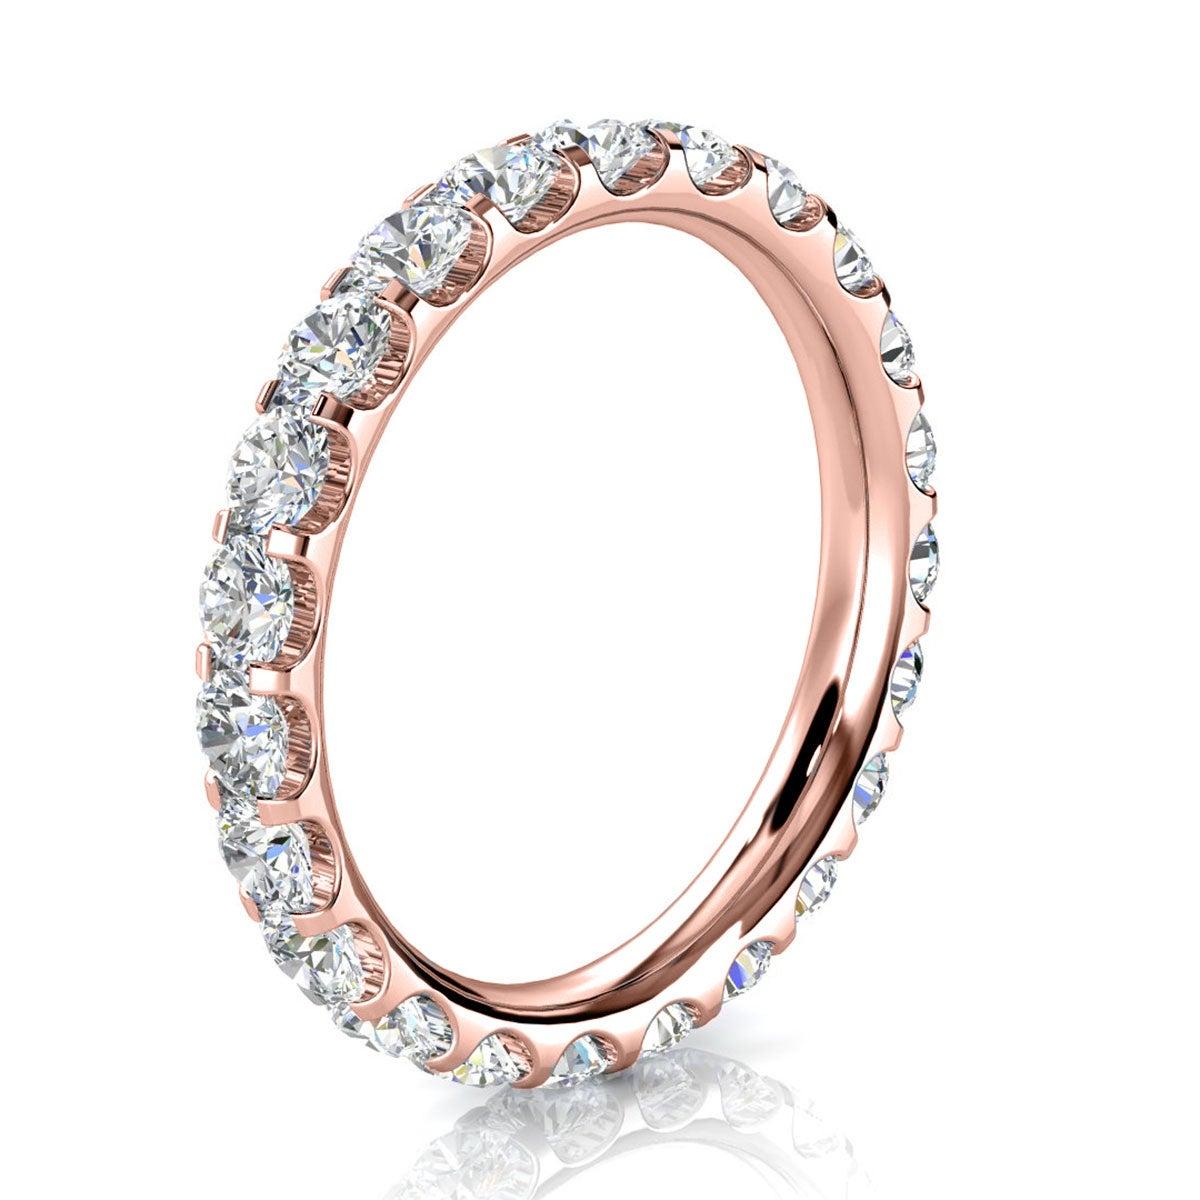 For Sale:  14k Rose Gold Viola Eternity Micro-Prong Diamond Ring '1 1/2 Ct. Tw' 2